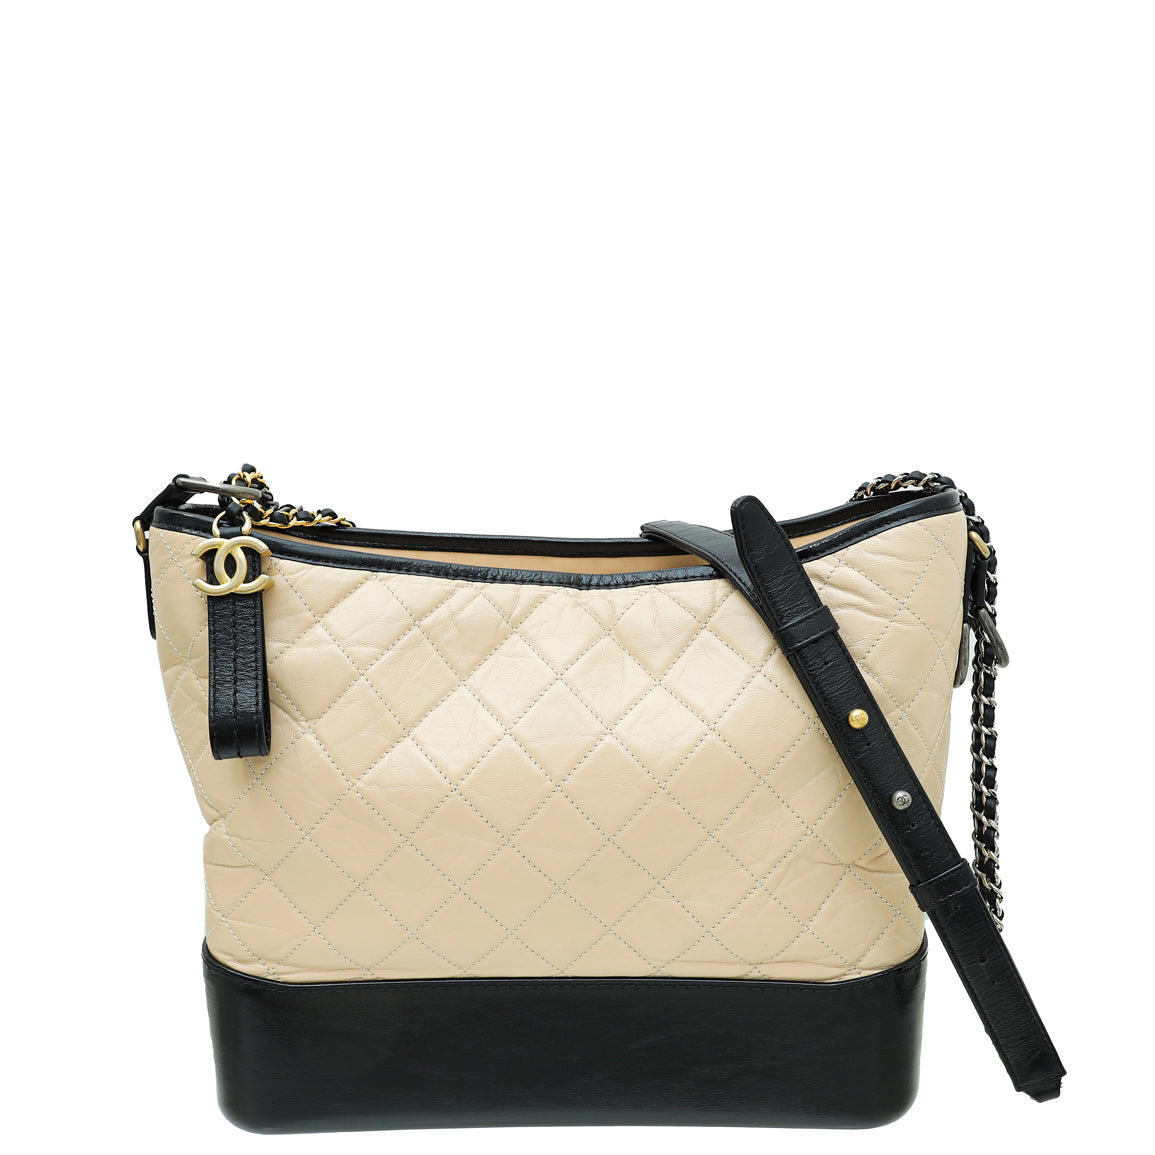 Chanel Beige/Black Quilted Leather Gabrielle Medium Hobo Bag